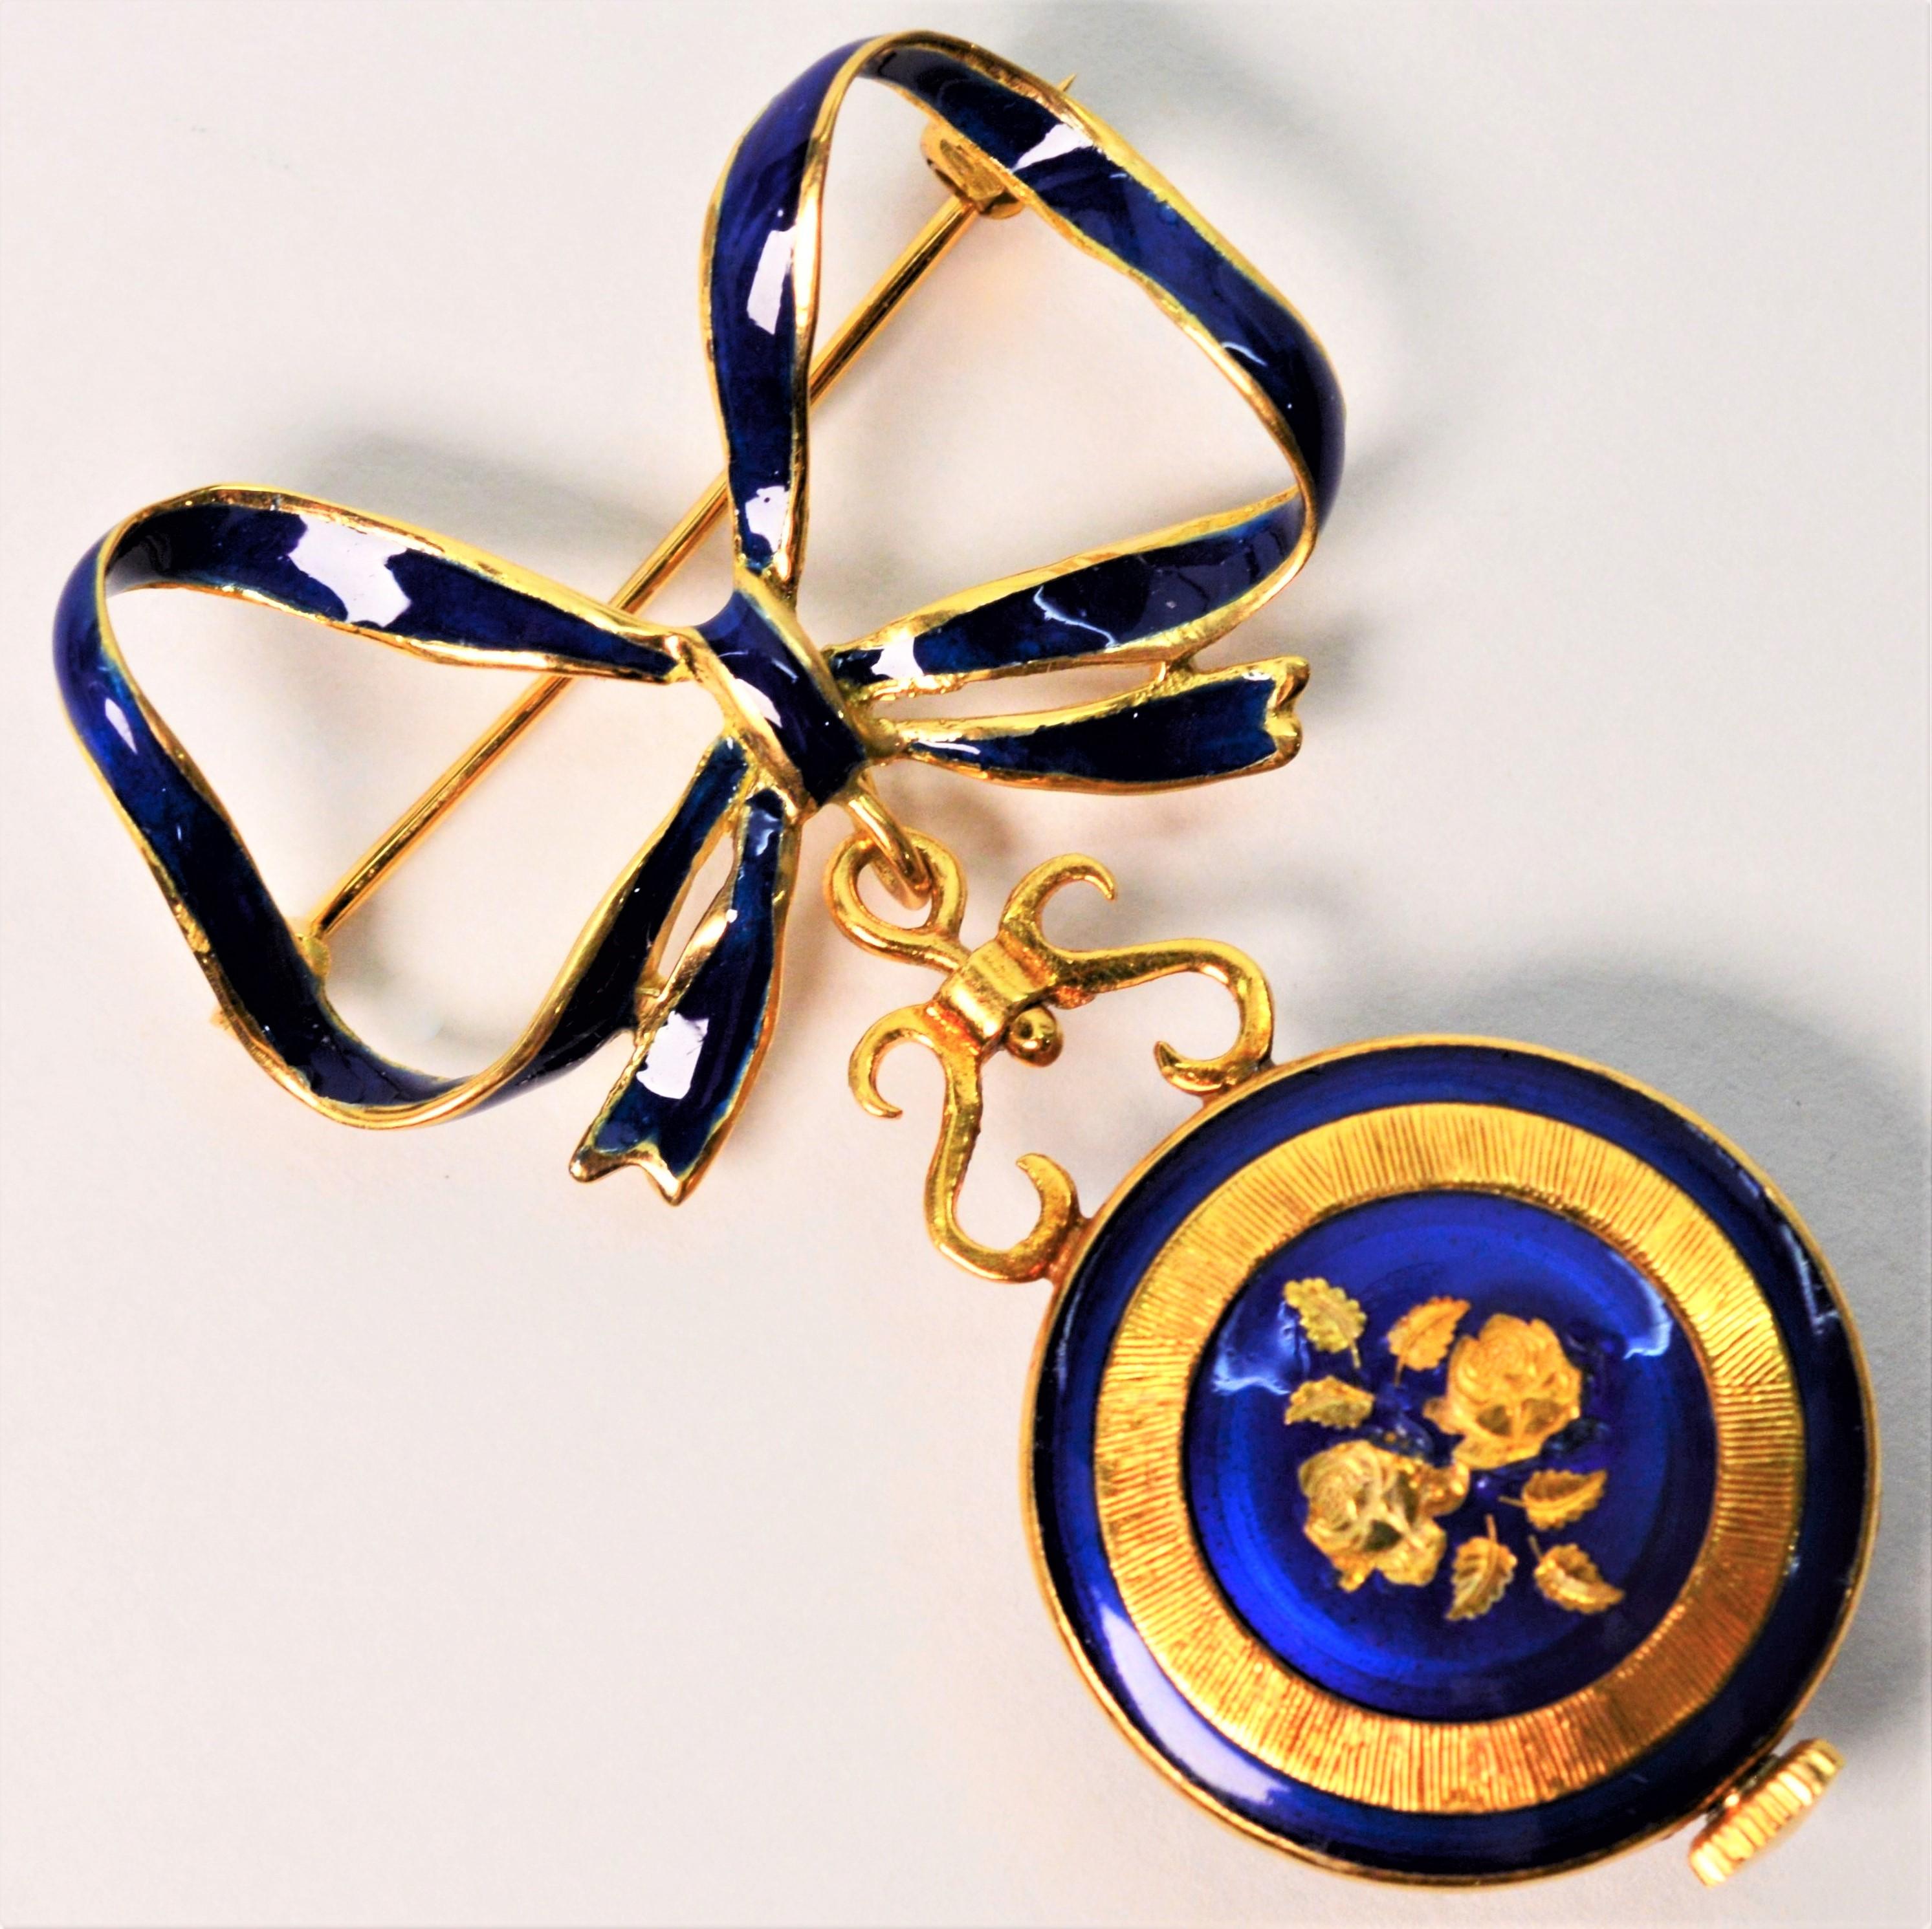 Italian Made Gold Watch Brooch with Blue Enamel Accents For Sale 3